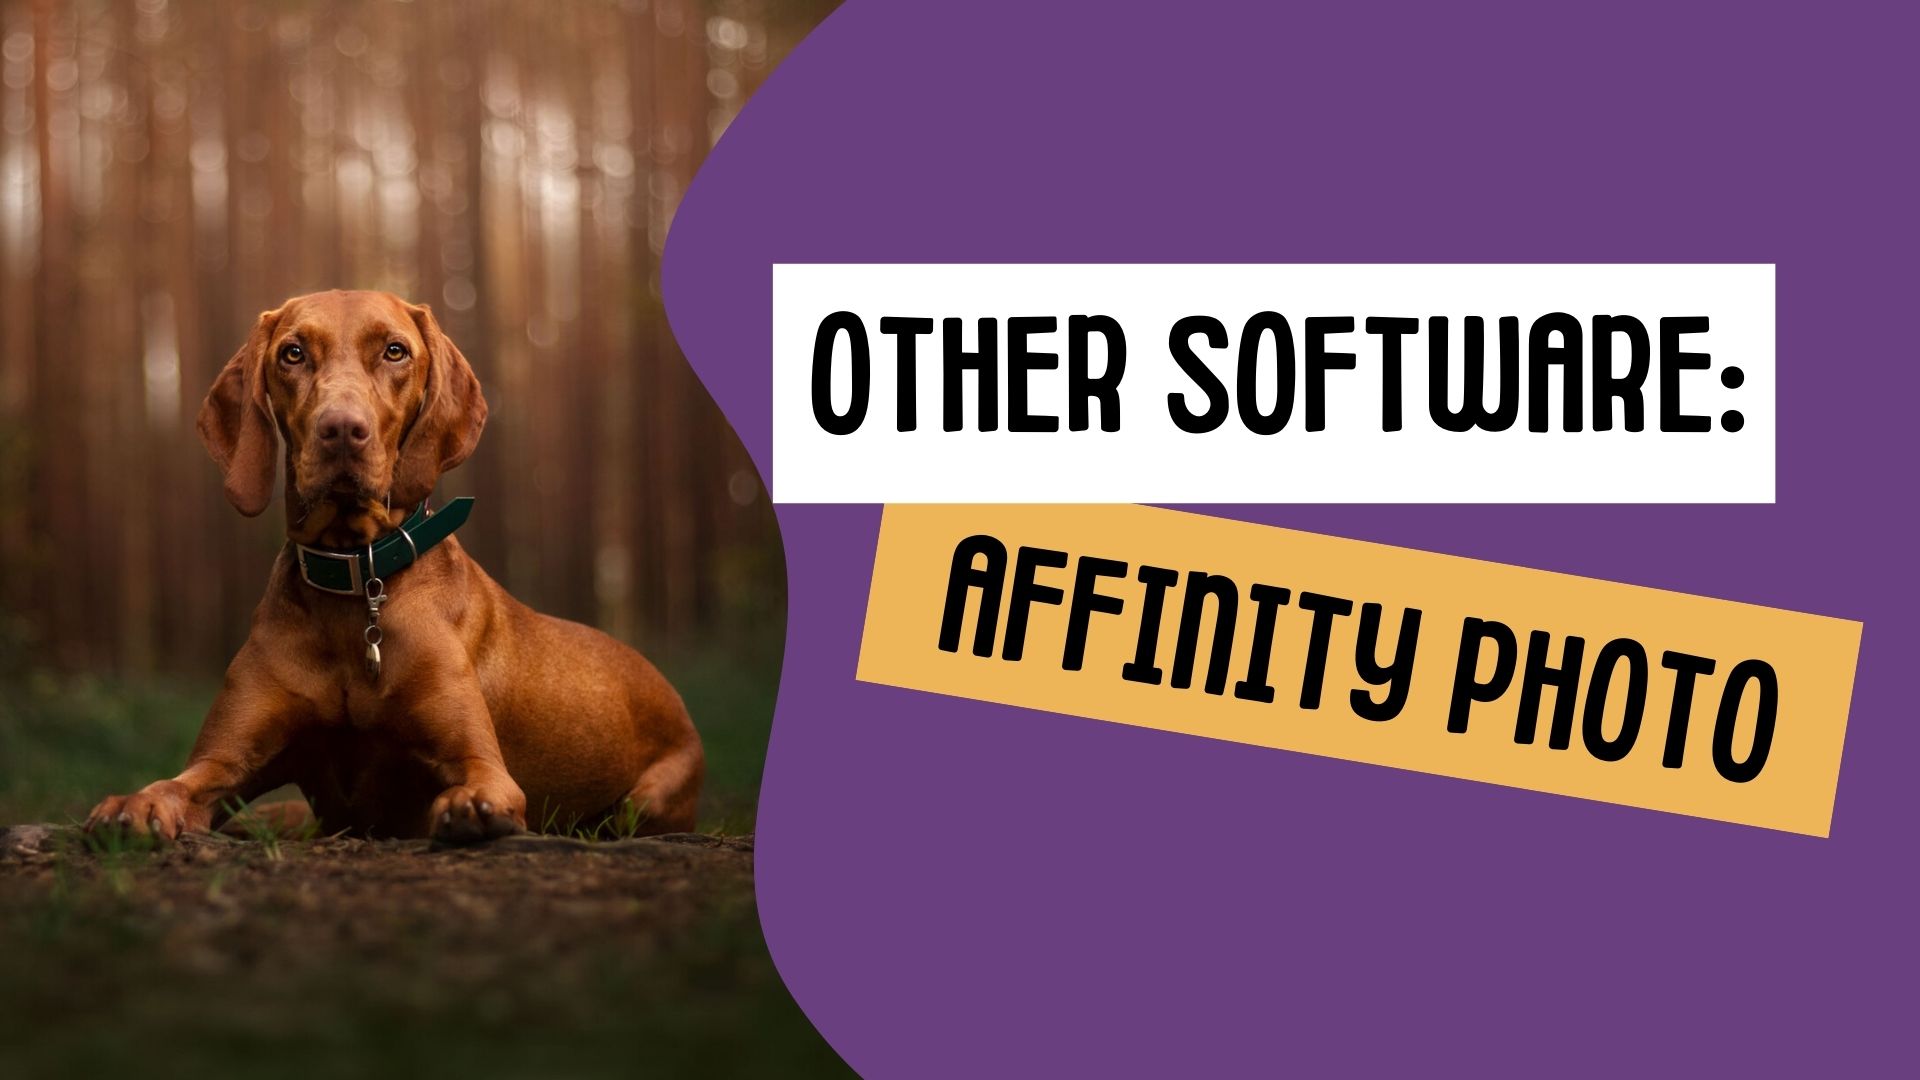 Other Editing Software: Affinity Photo